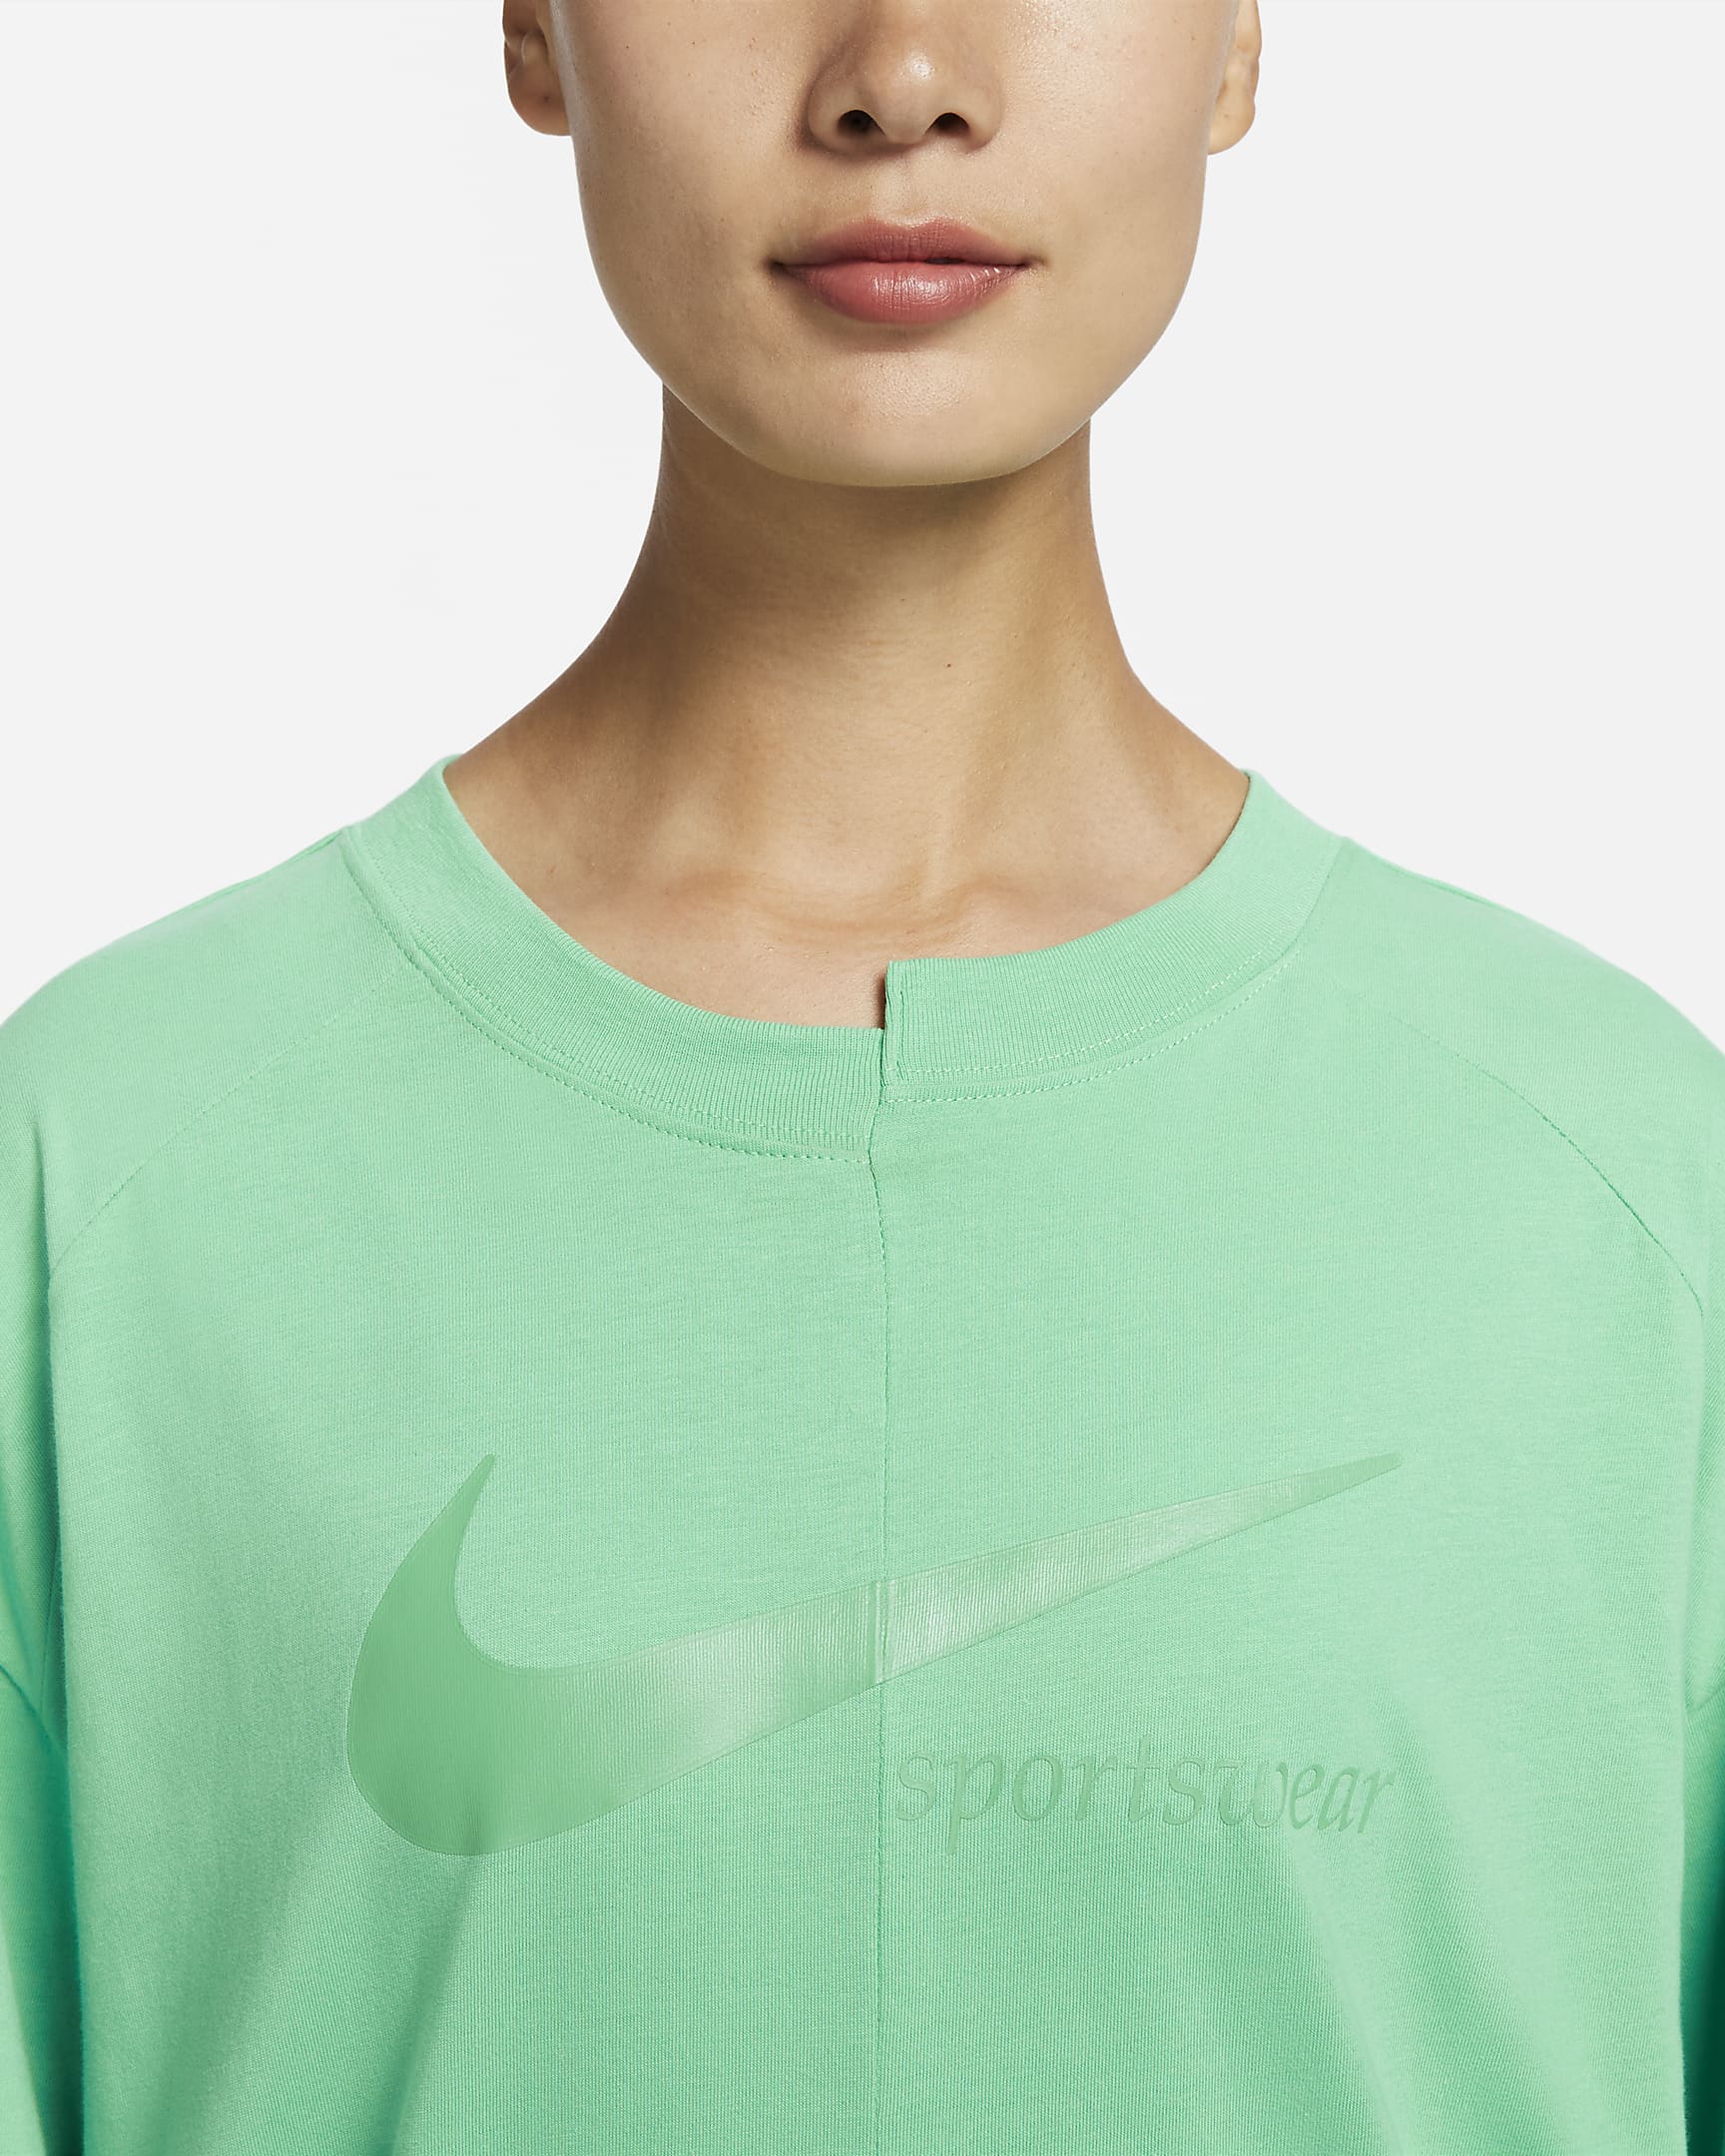 Nike Sportswear Collection Women's Over-Oversized Top. Nike MY